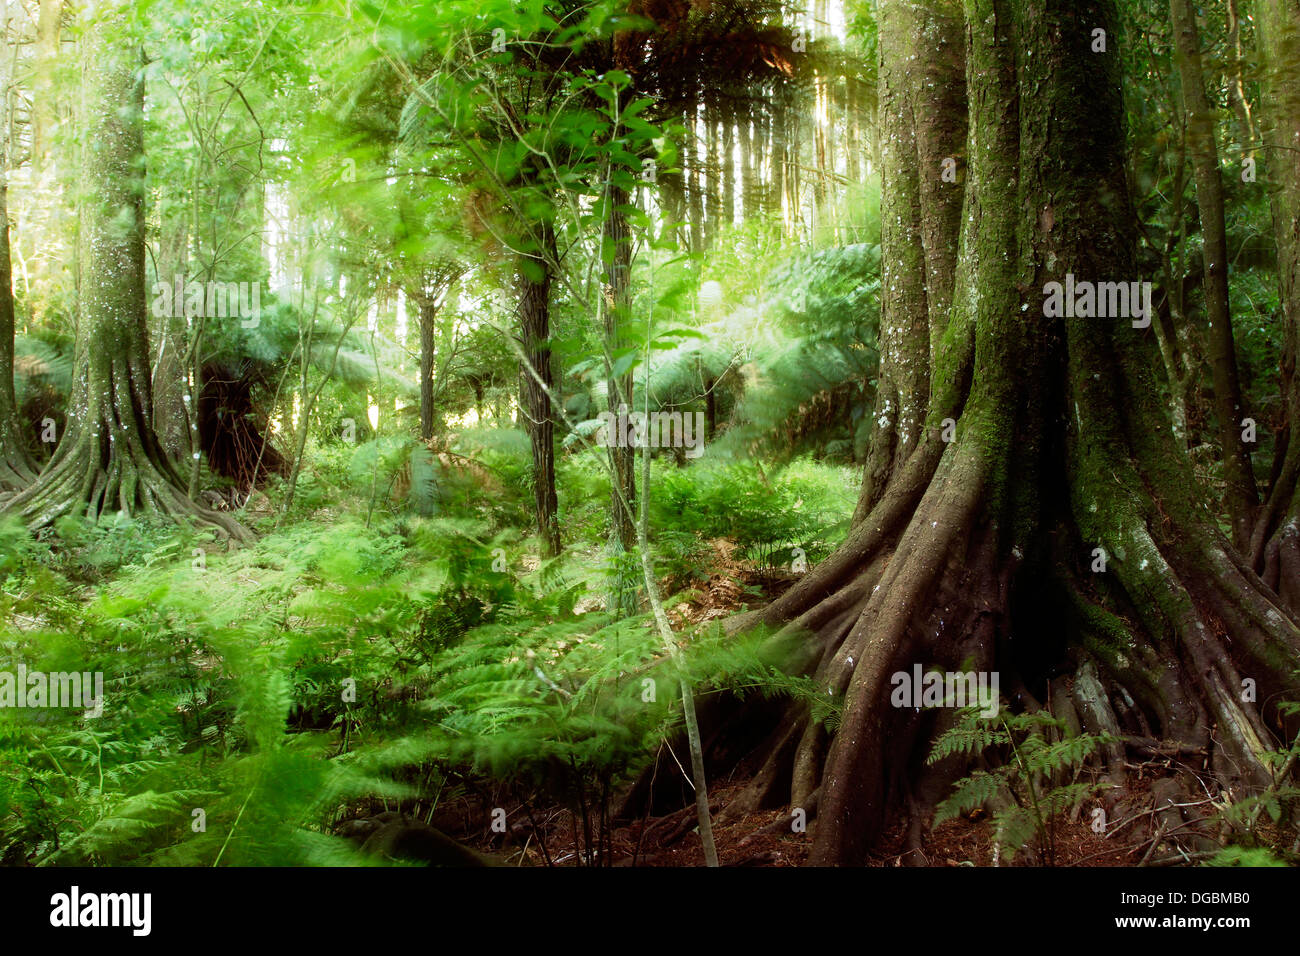 New Zealand tropical forest jungle Stock Photo